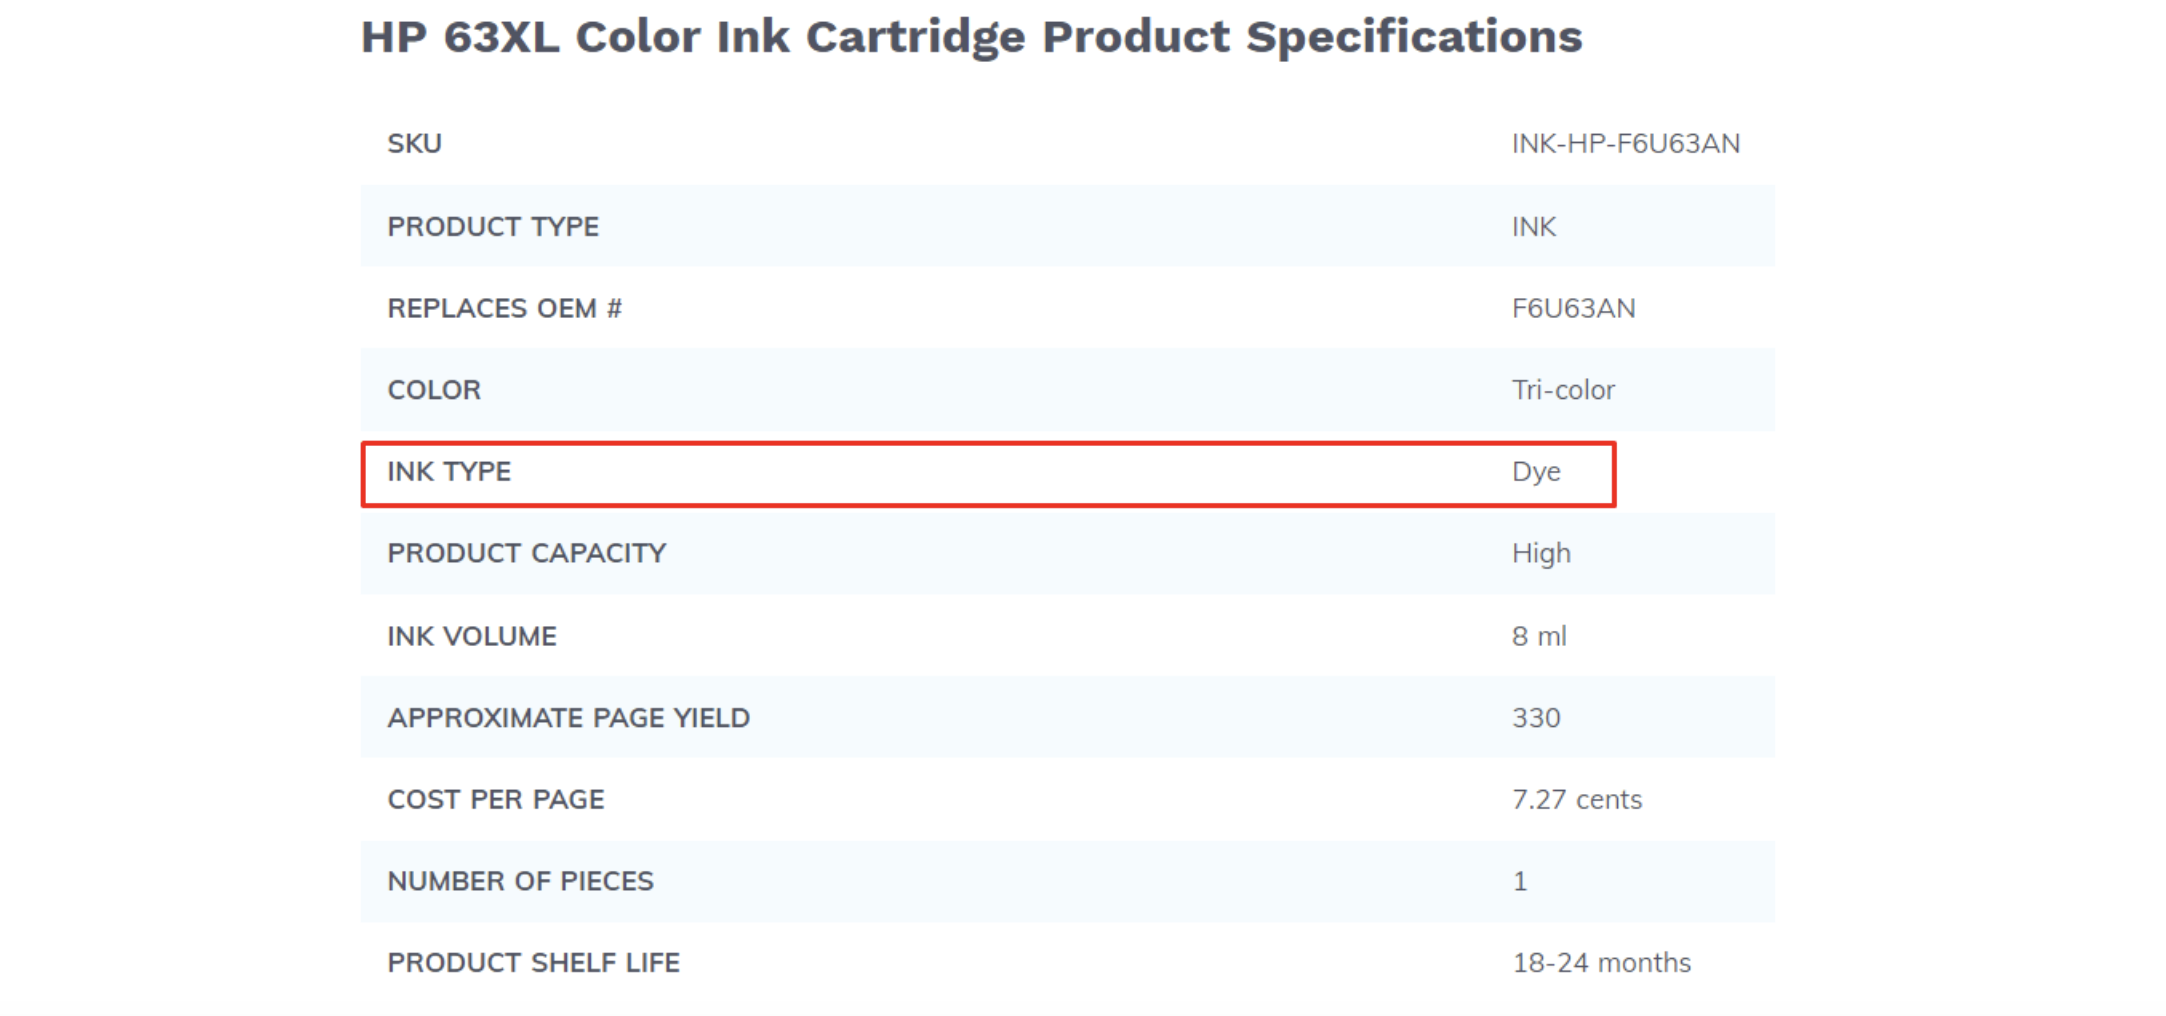 HP 63KL COLOR INK CARTRIDGE PRODUCT SPECIFICATIONS